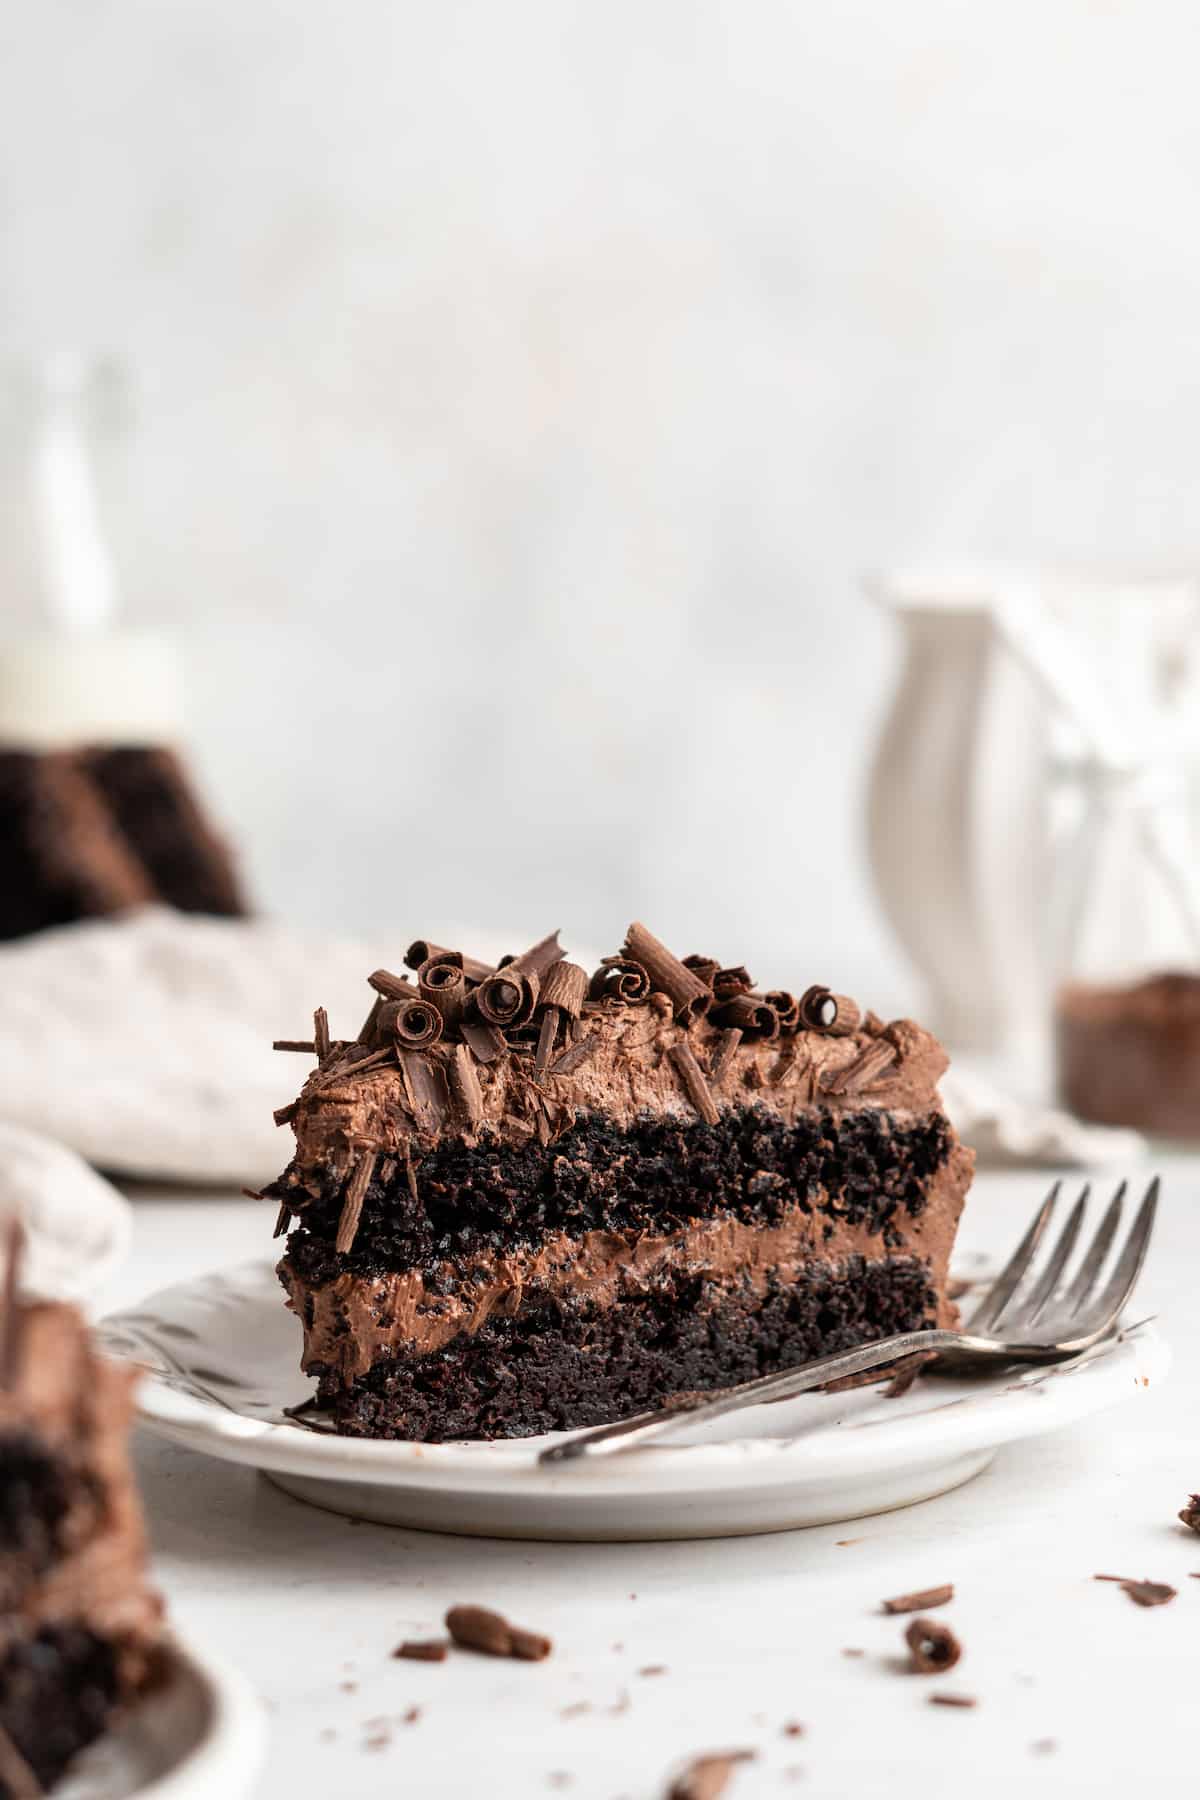 Slice of vegan chocolate cake on plate with fork